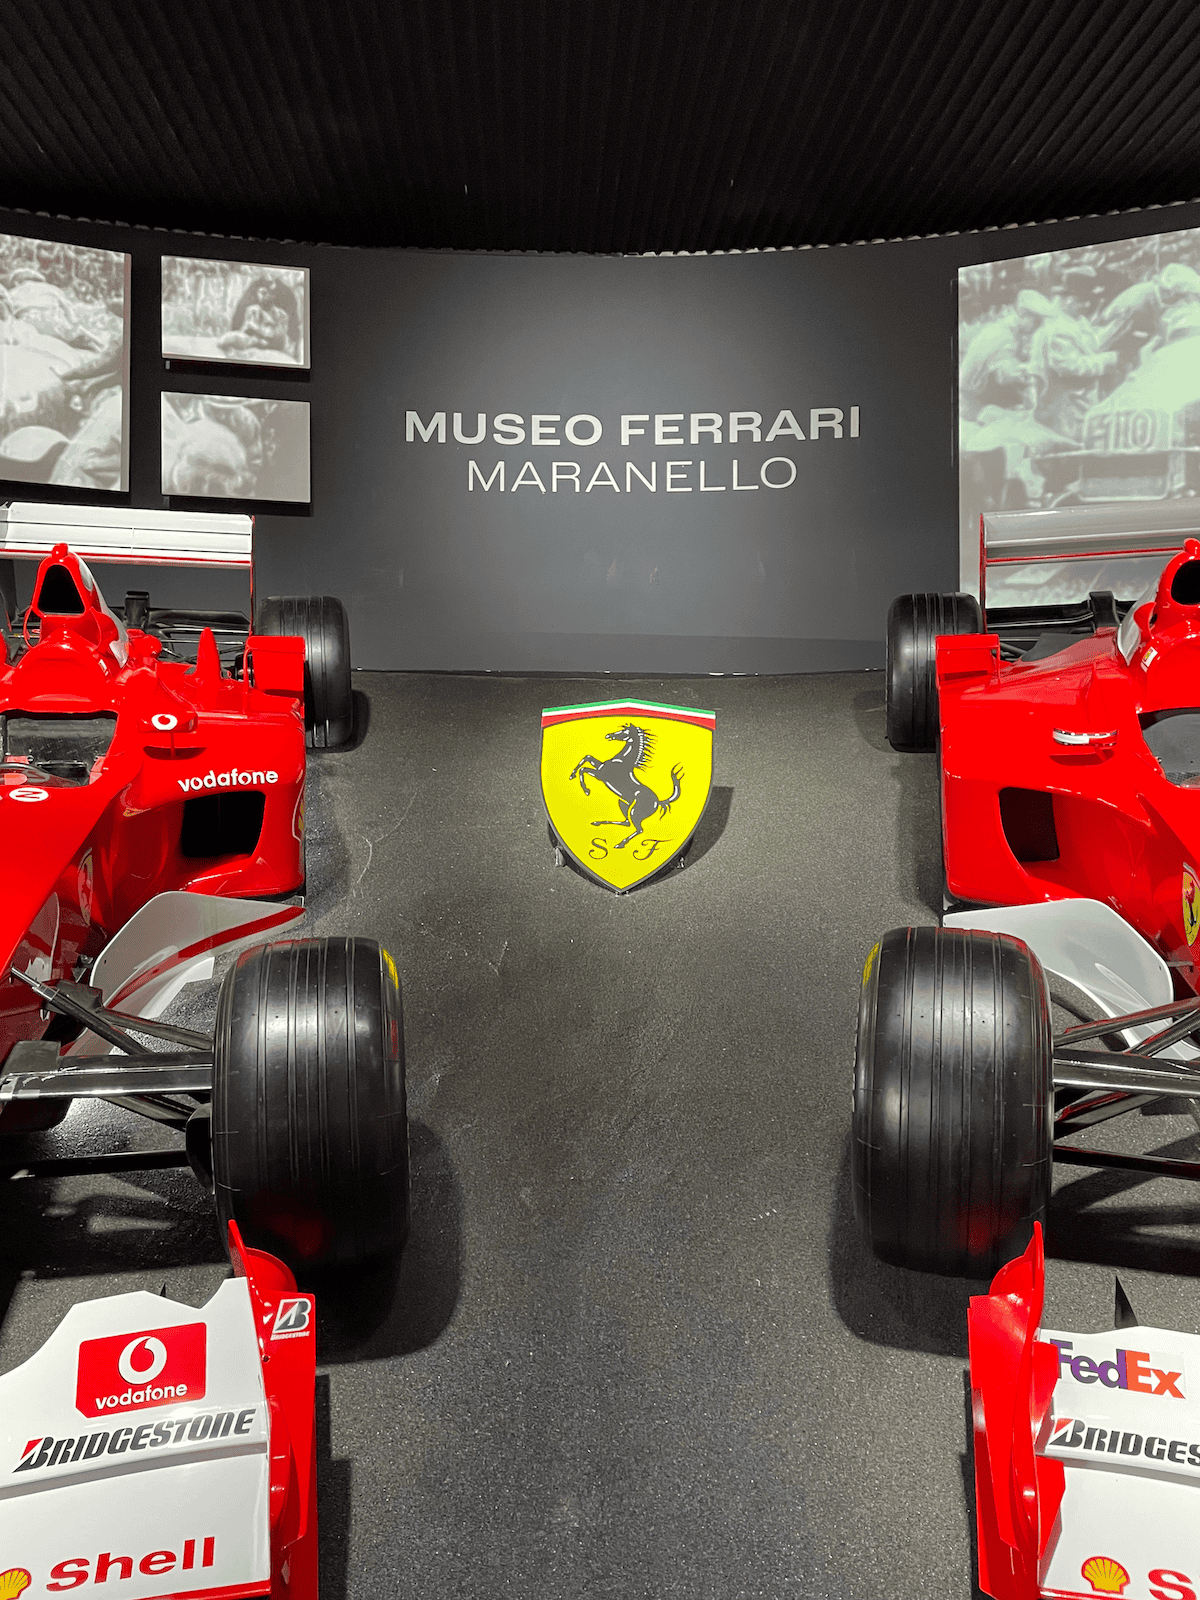 two ferrari F1 cars and the words 'museo ferrari maranello' on the wall with the ferrari logo in the middle